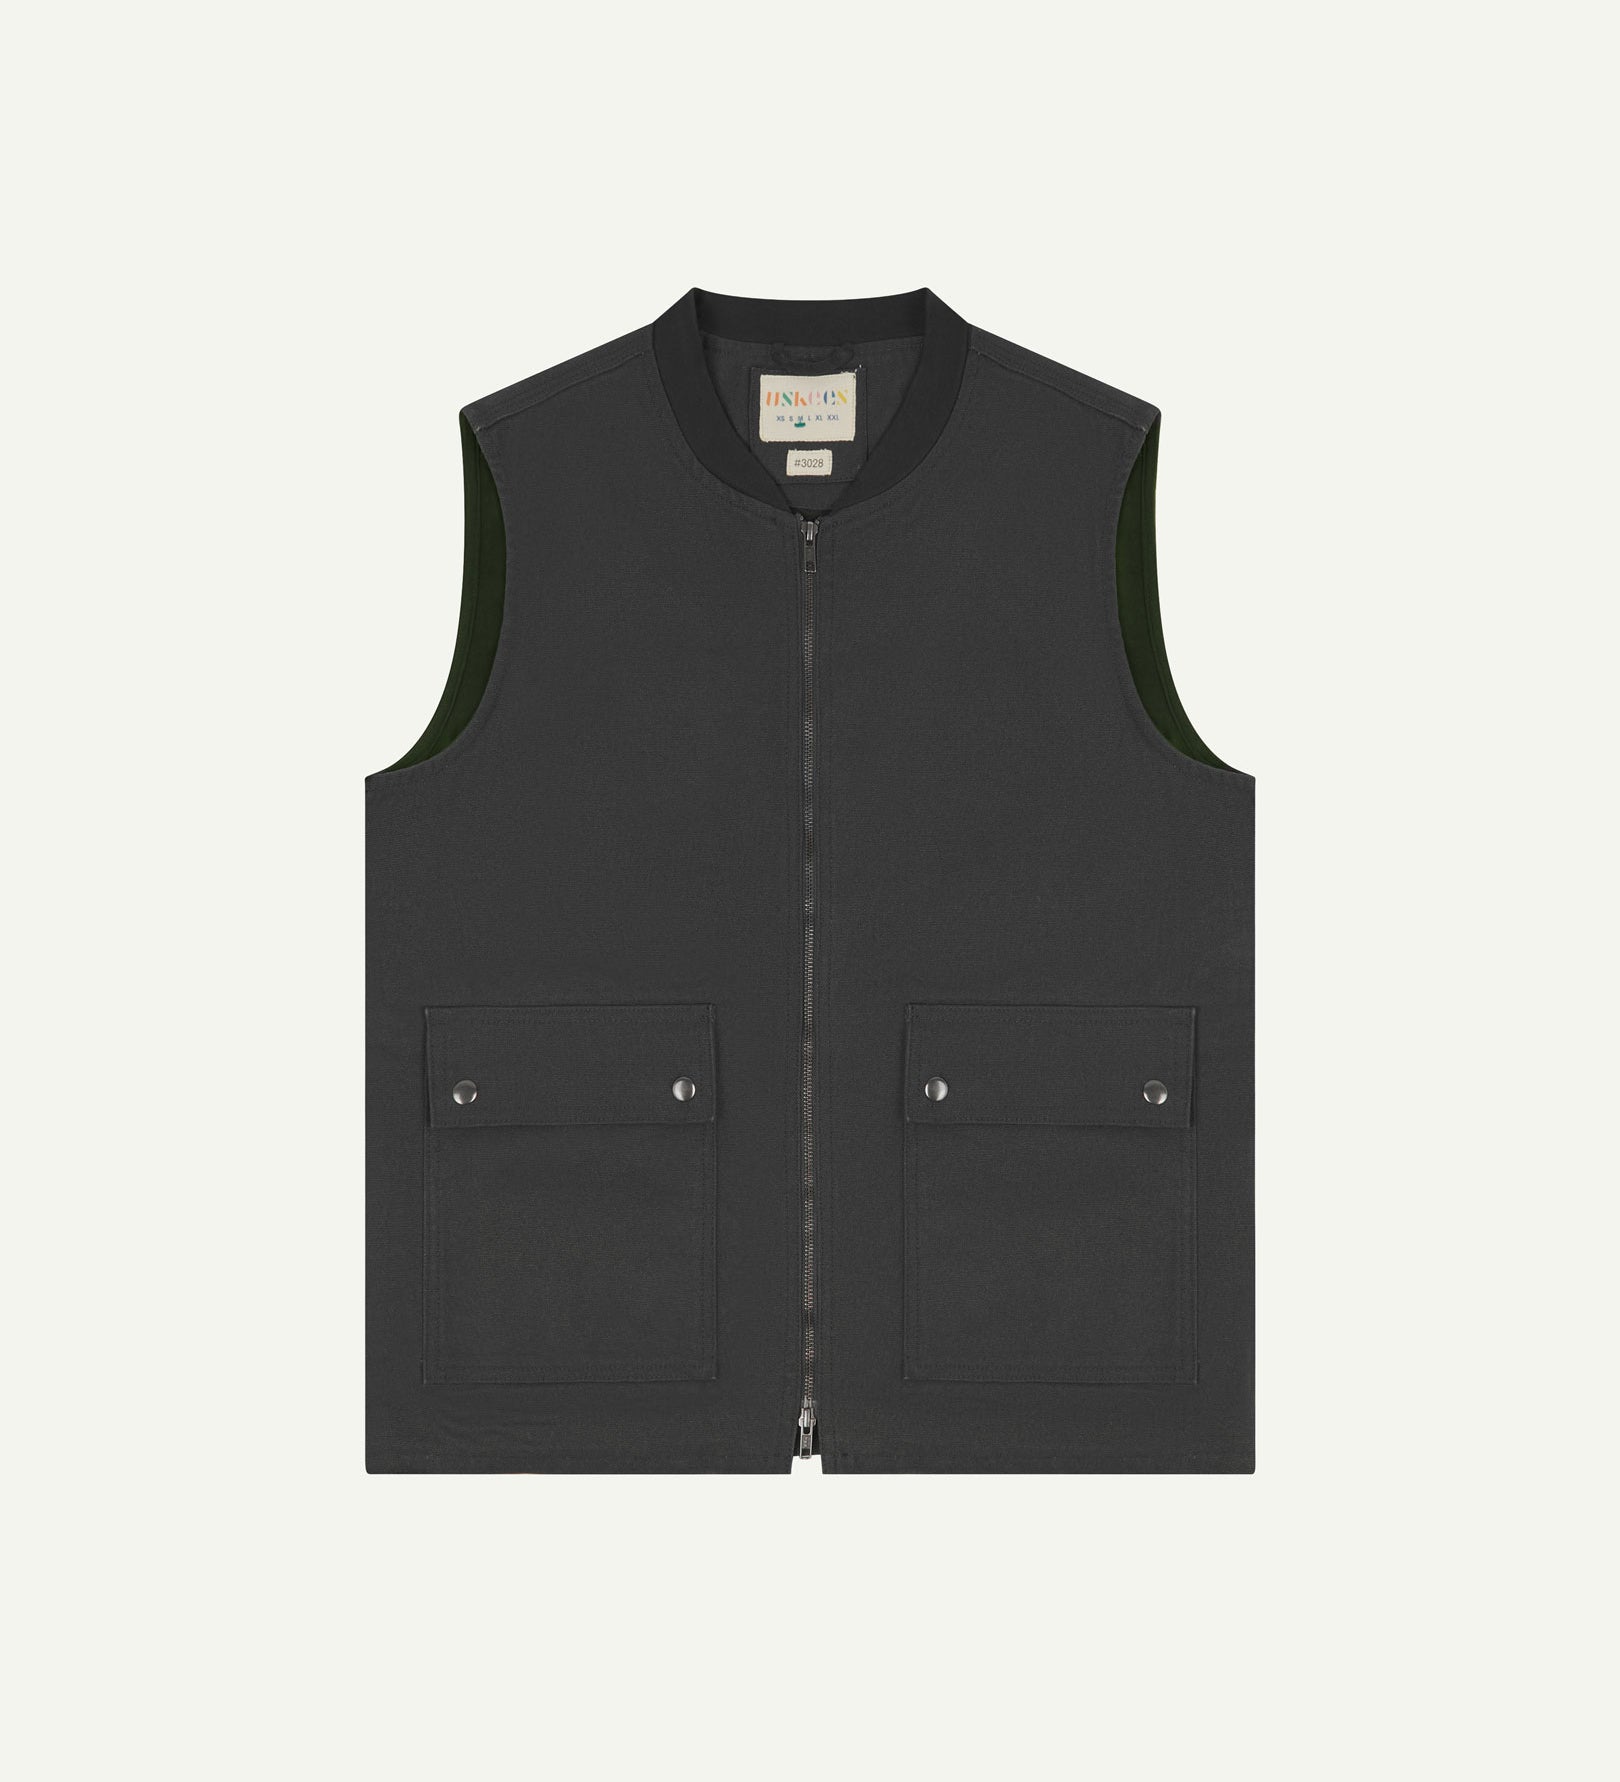 Front flat shot of Uskees charcoal-grey gilet-type zip front waistcoat showing the front flap pockets and inner brand label at neck.